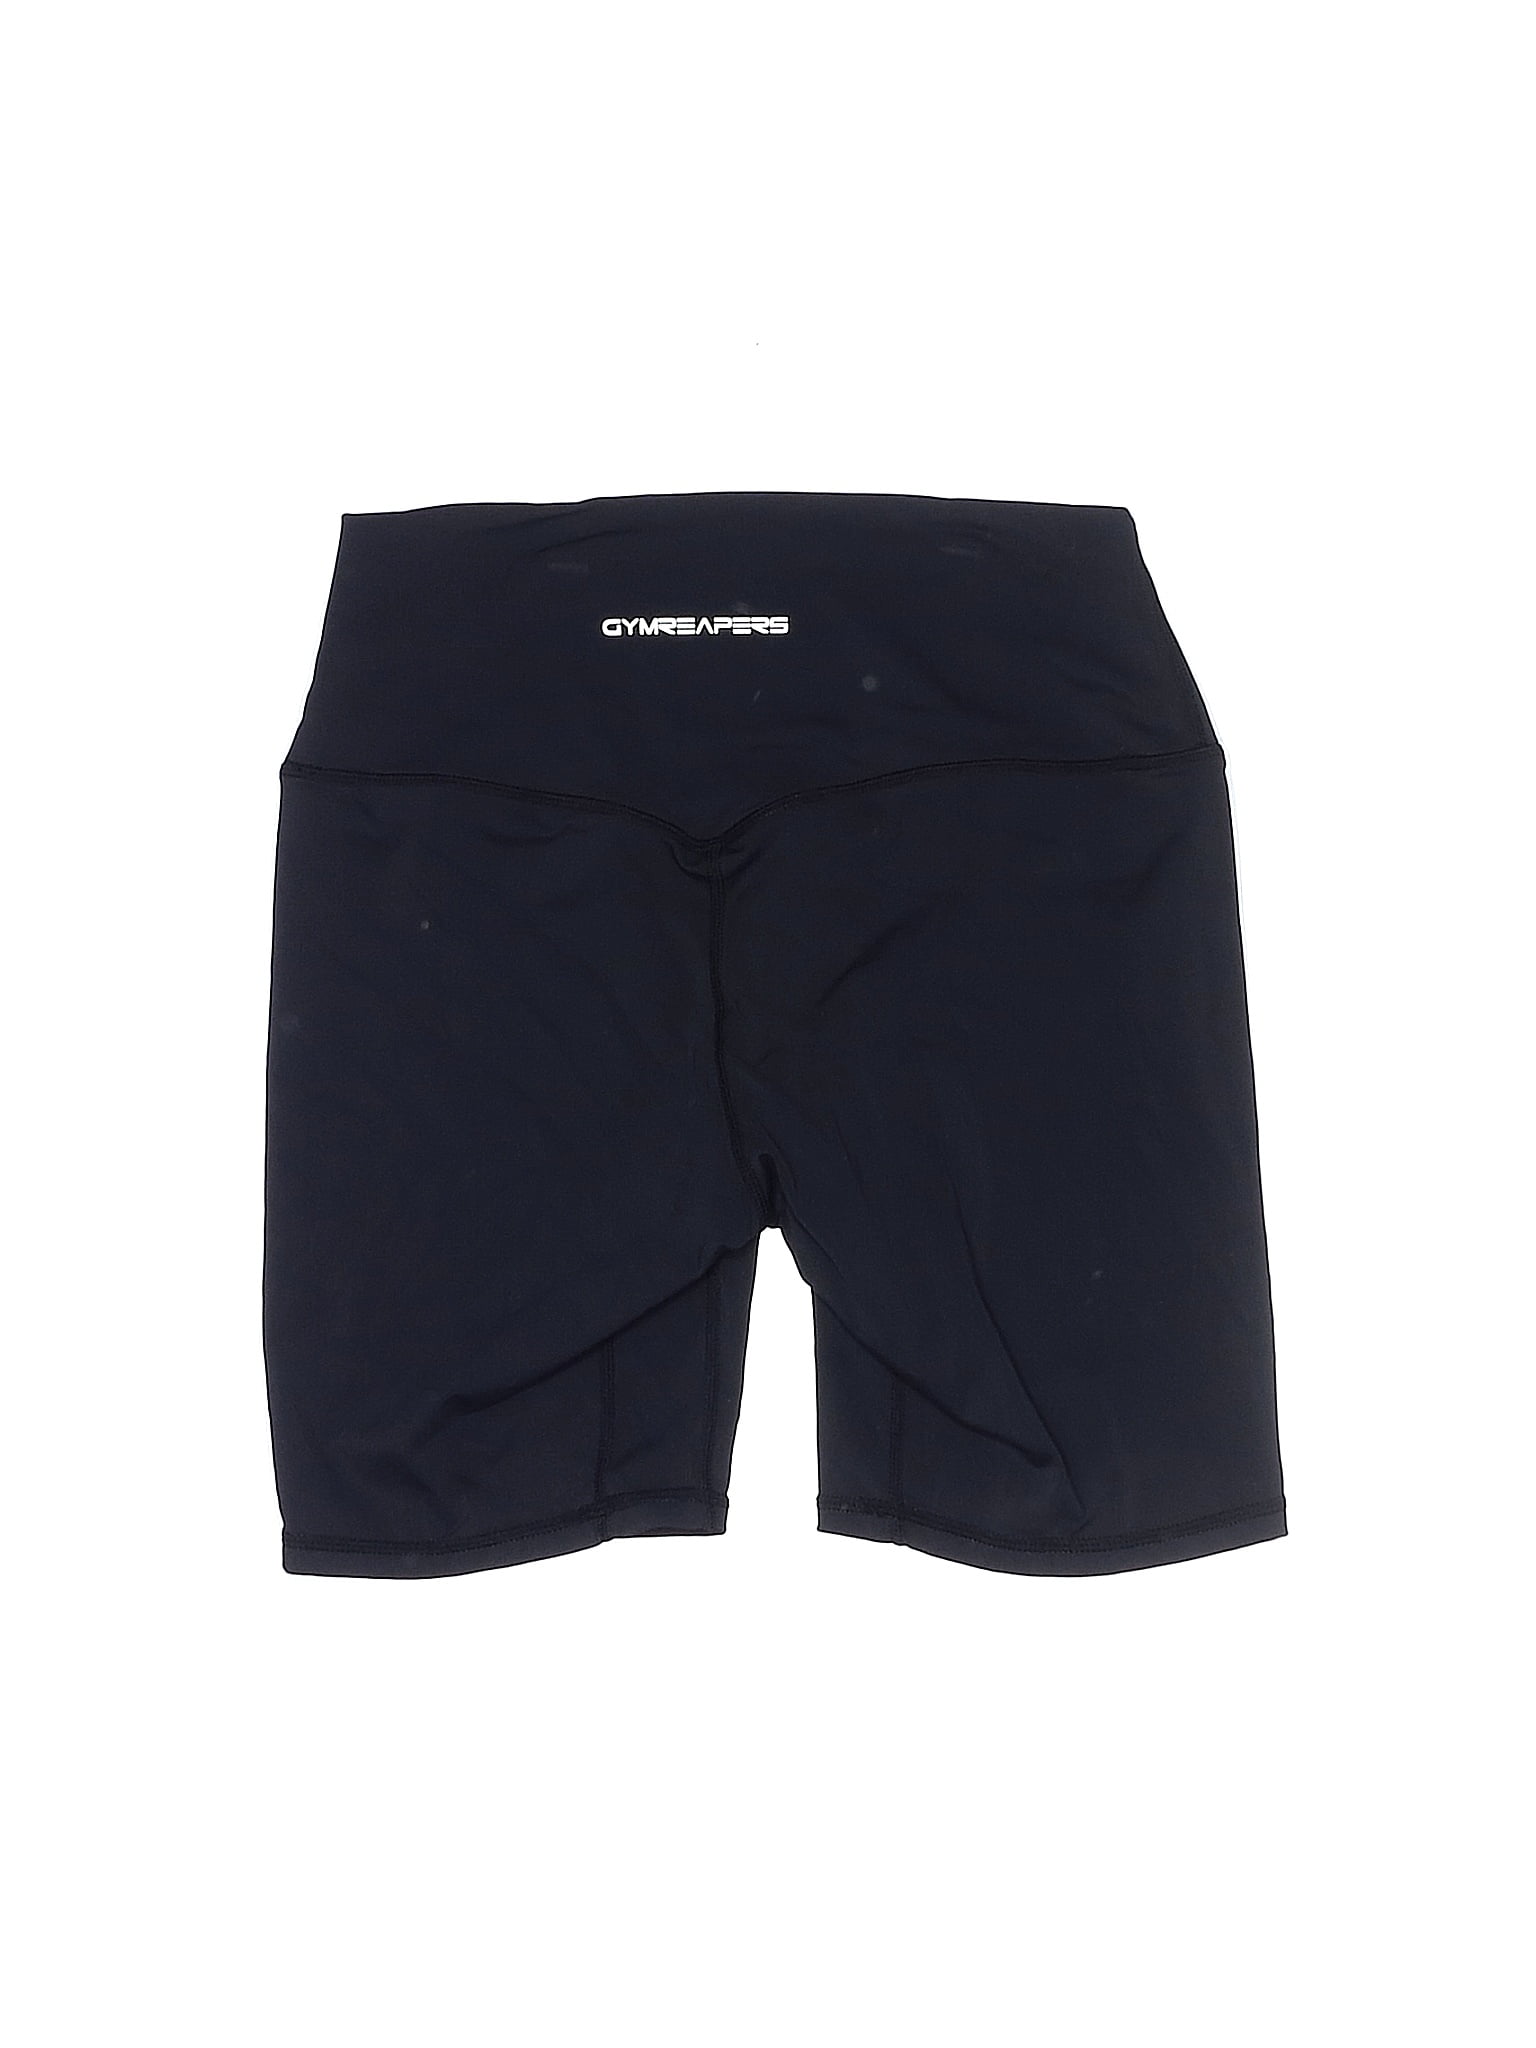 Assorted Brands Solid Navy Blue Athletic Shorts Size M - 44% off